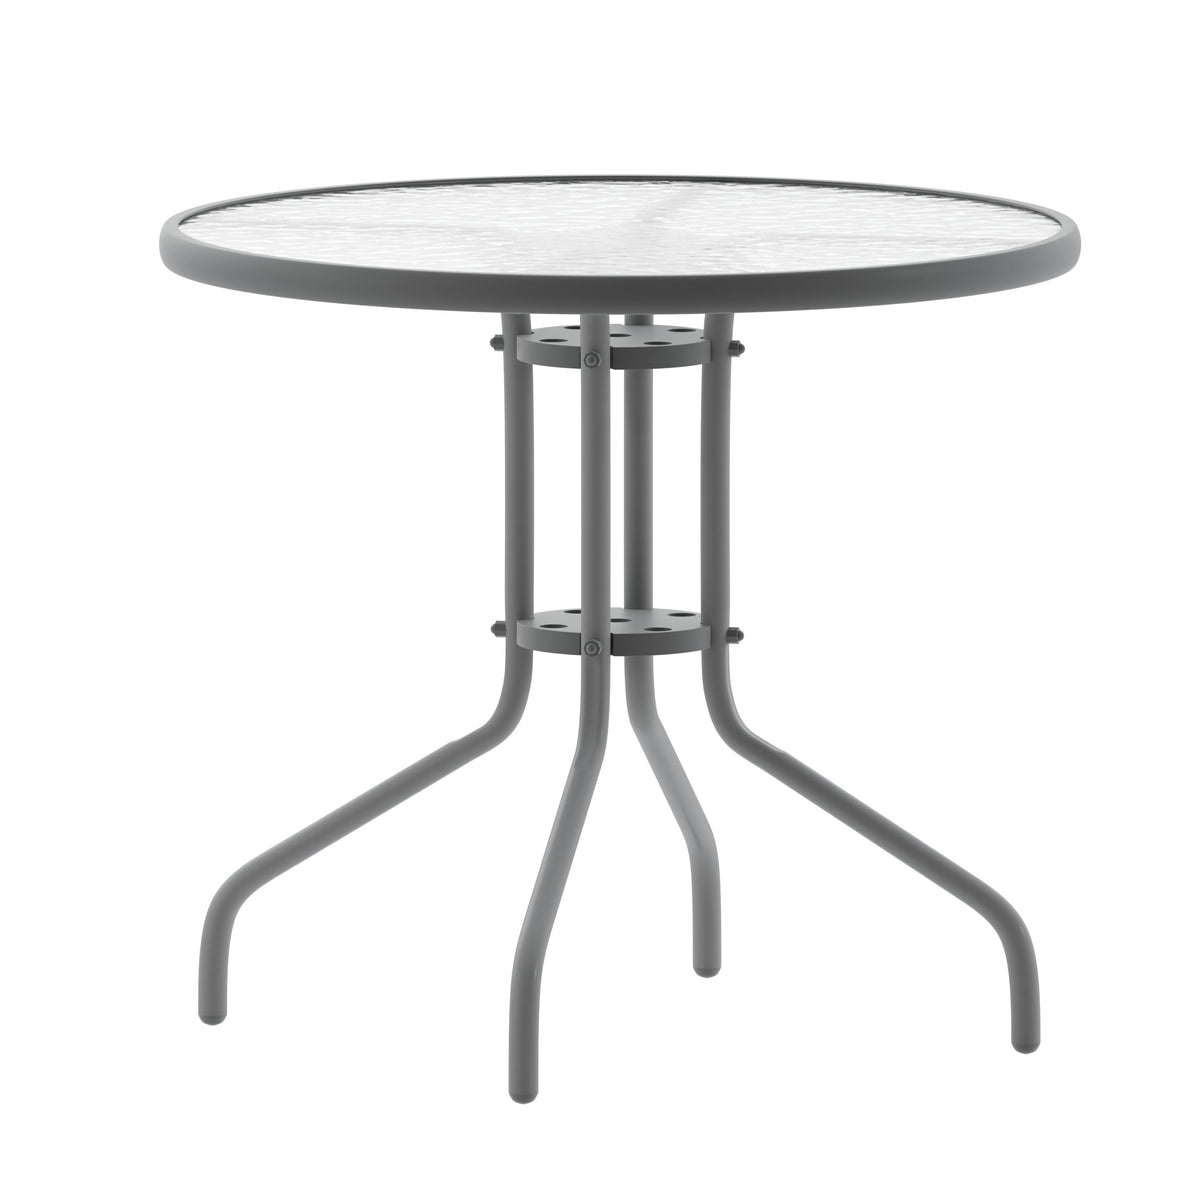 Silver |#| Modern 31.5inch Round Glass Framed Glass Table with 4 Silver Slat Back Chairs